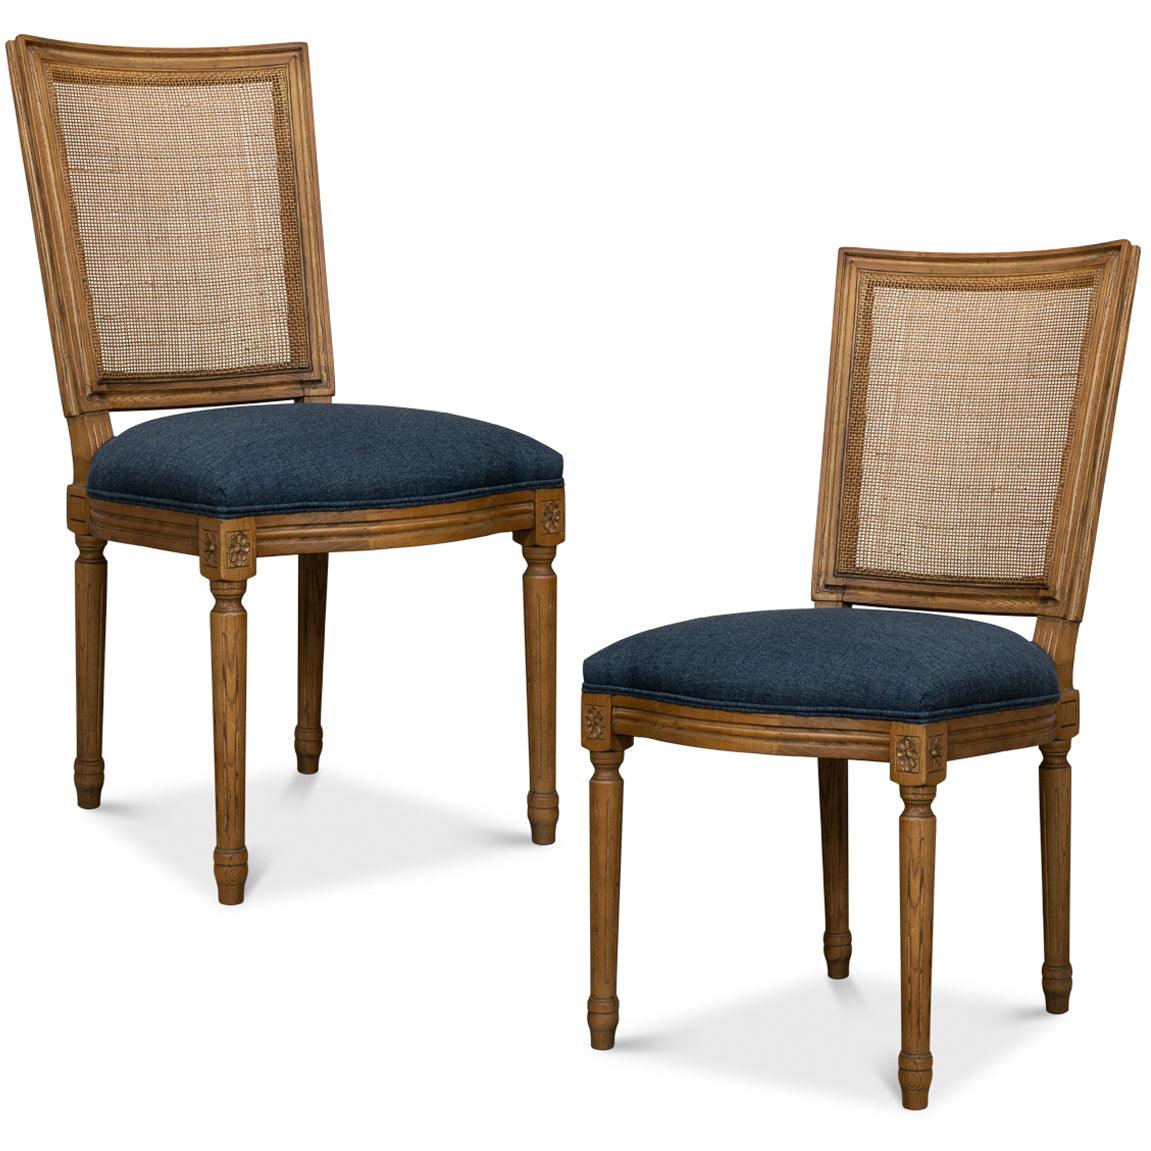 French Country Cane Dining Chair - Belle Escape